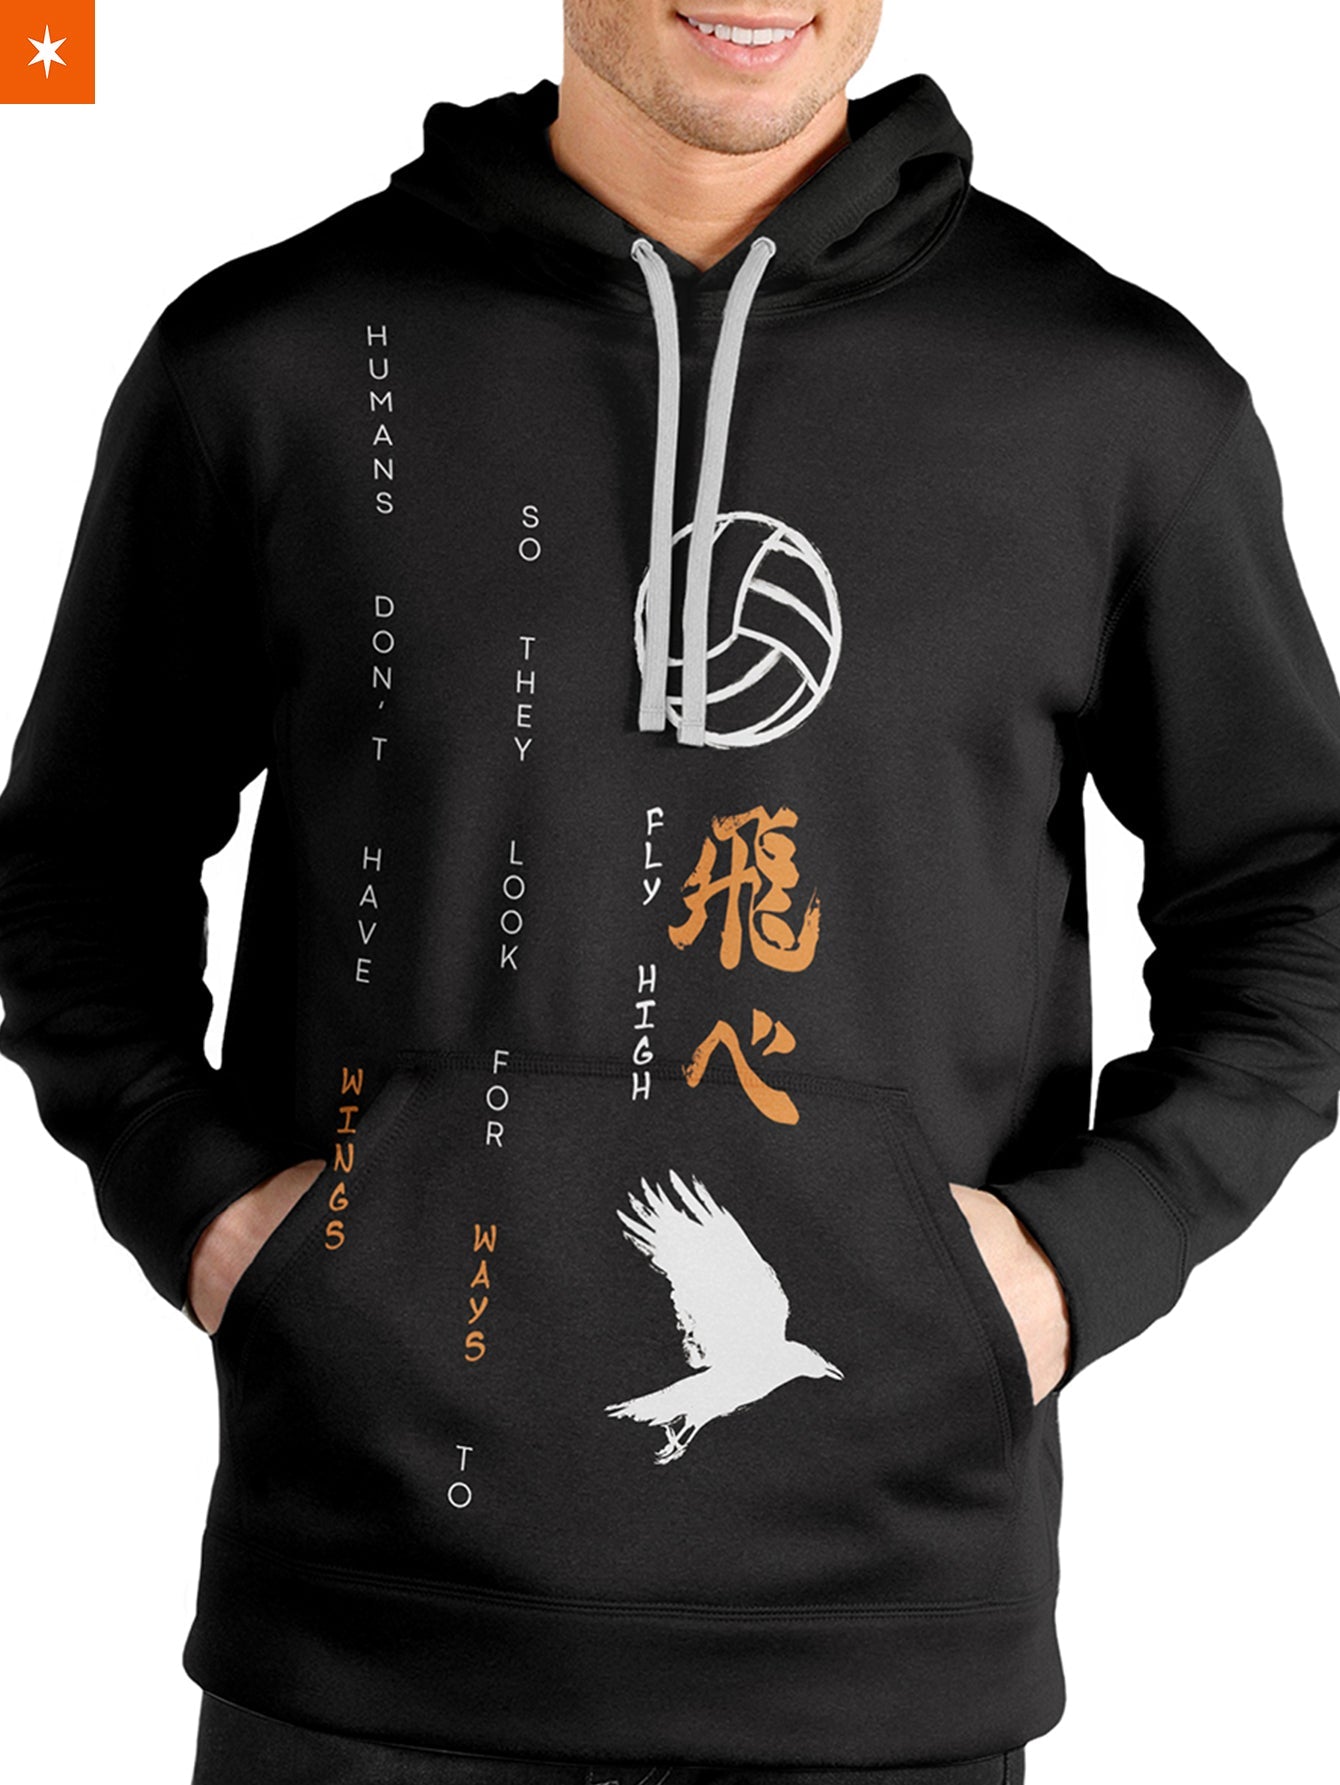 Fandomaniax - You Can Fly High Unisex Pullover Hoodie